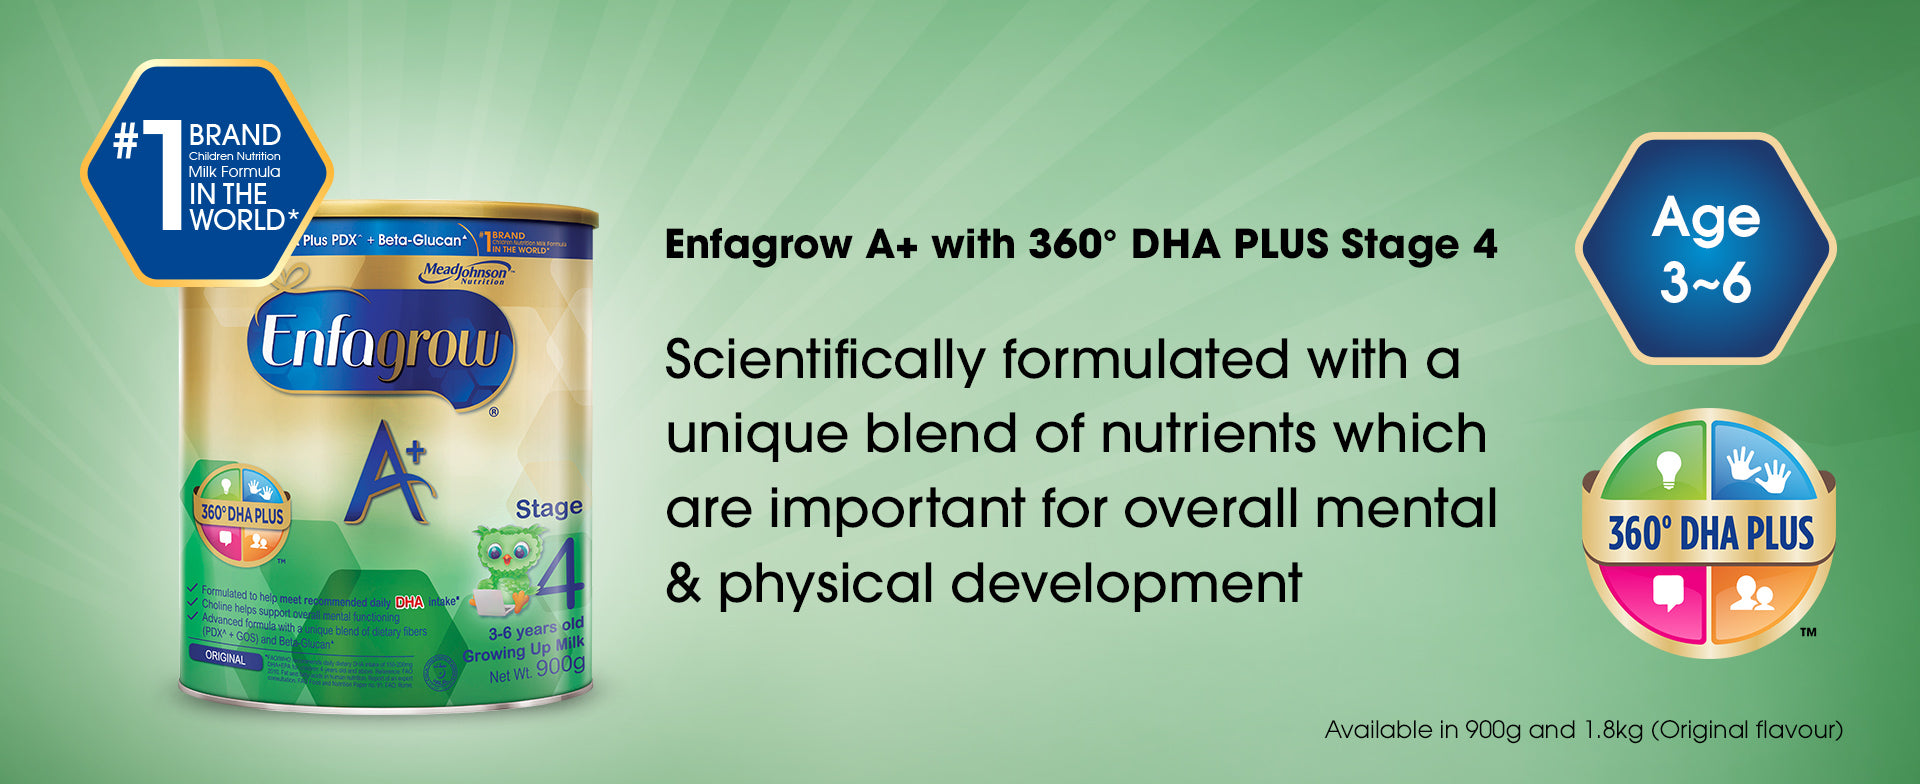 Enfagrow A+ with 360 degrees DHA PLUS Stage 4 - a product banner image with basic information